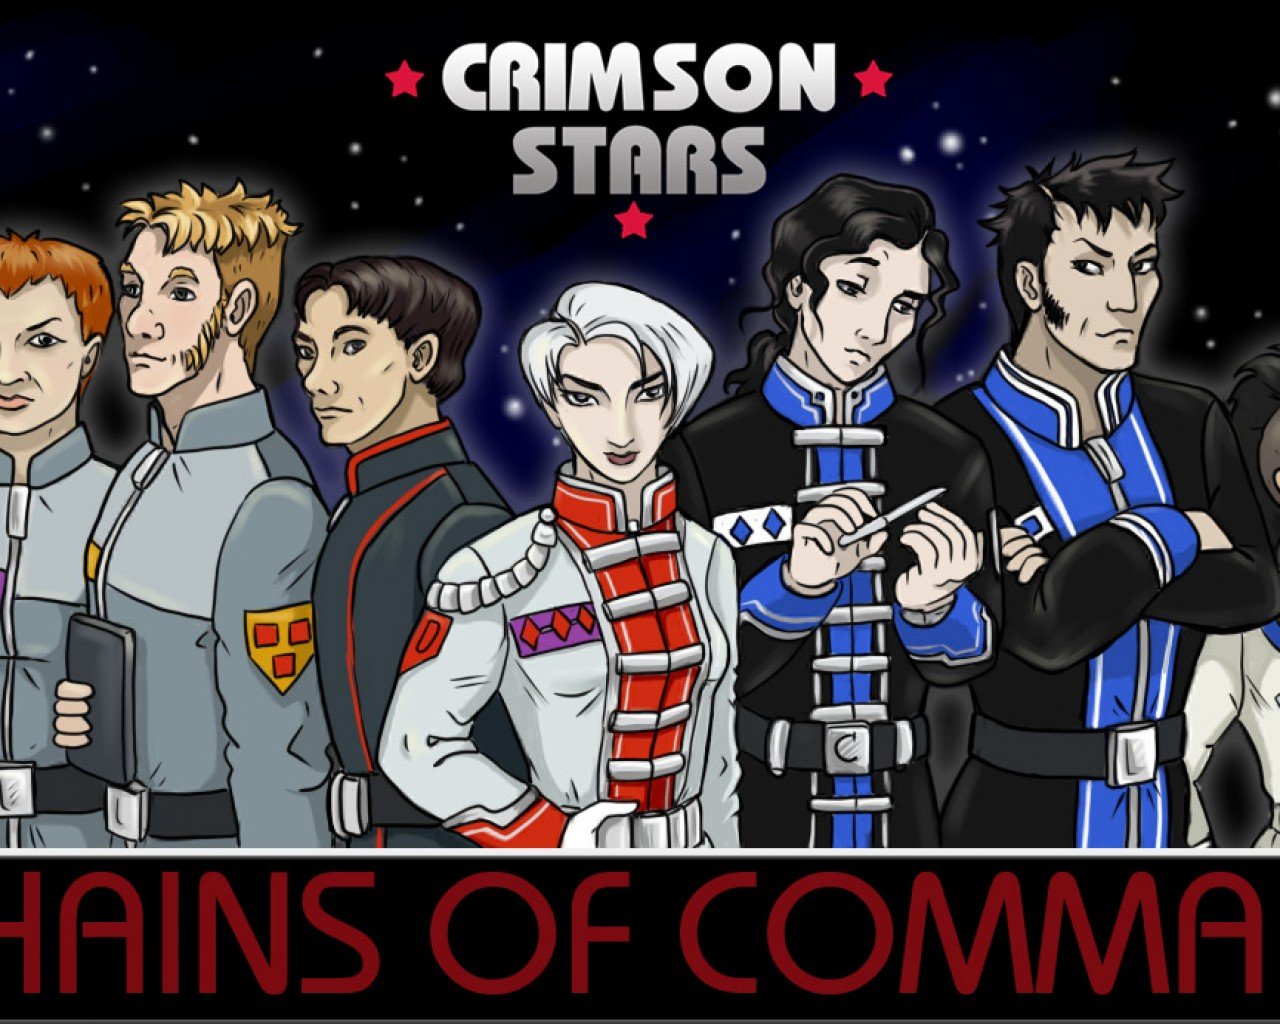 Poster Image for Crimson Stars: Chains of Command